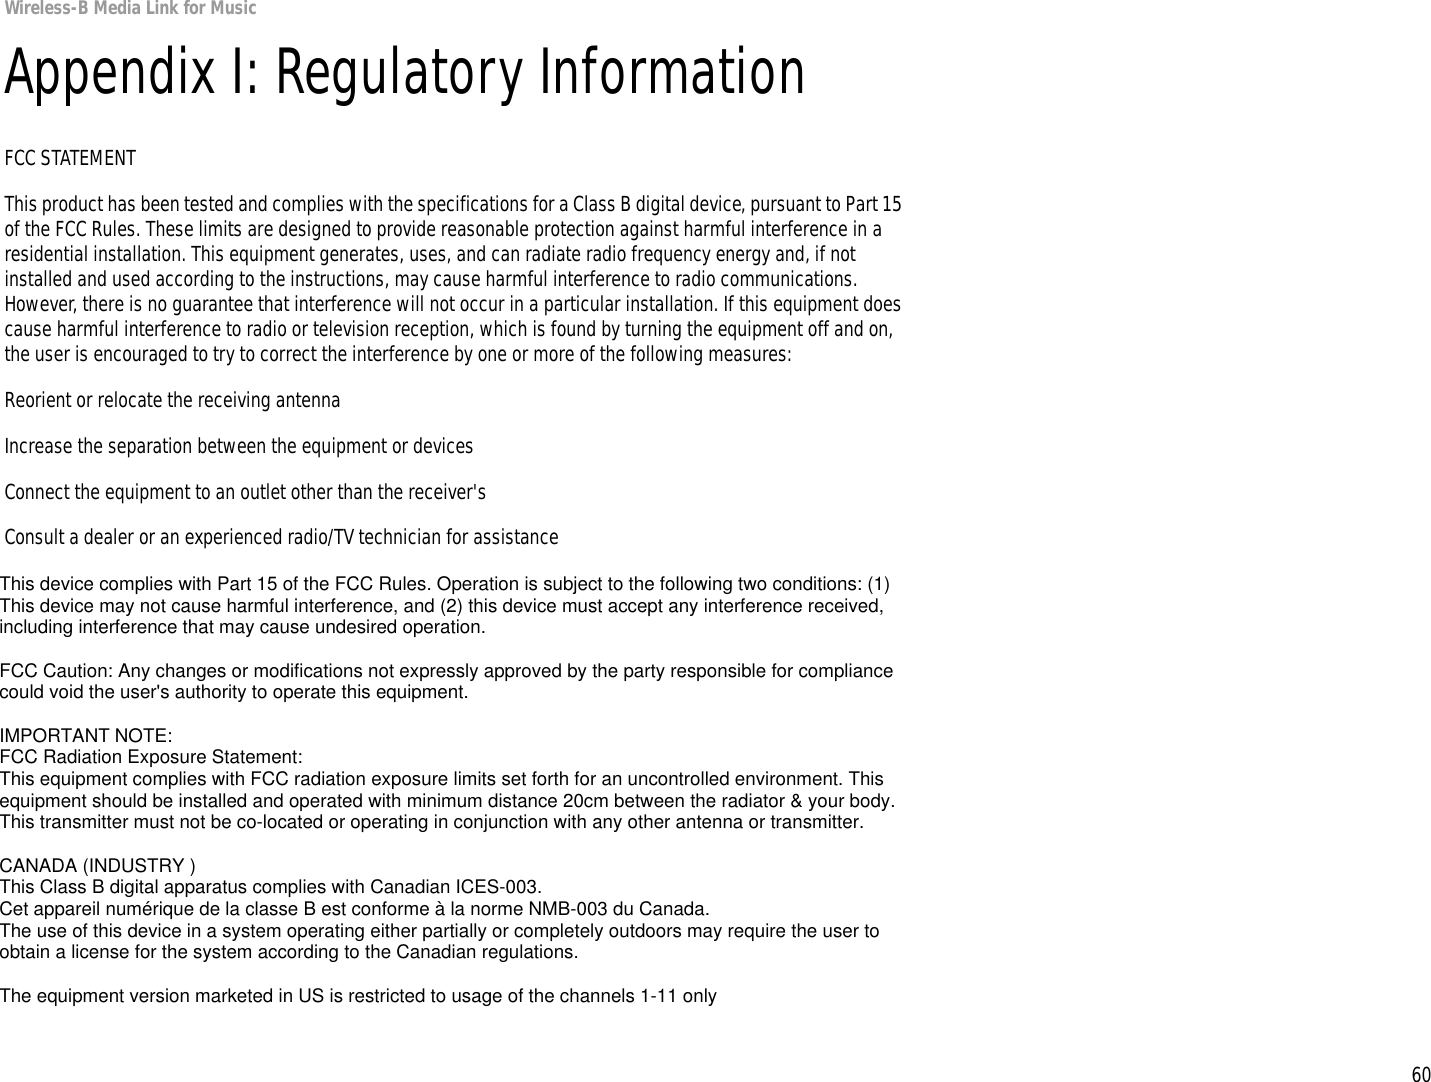 60Appendix I: Regulatory InformationWireless-B Media Link for MusicAppendix I: Regulatory InformationFCC STATEMENTThis product has been tested and complies with the specifications for a Class B digital device, pursuant to Part 15 of the FCC Rules. These limits are designed to provide reasonable protection against harmful interference in a residential installation. This equipment generates, uses, and can radiate radio frequency energy and, if not installed and used according to the instructions, may cause harmful interference to radio communications. However, there is no guarantee that interference will not occur in a particular installation. If this equipment does cause harmful interference to radio or television reception, which is found by turning the equipment off and on, the user is encouraged to try to correct the interference by one or more of the following measures:Reorient or relocate the receiving antennaIncrease the separation between the equipment or devicesConnect the equipment to an outlet other than the receiver&apos;sConsult a dealer or an experienced radio/TV technician for assistanceFCC Radiation Exposure StatementThis equipment complies with FCC radiation exposure limits set forth for an uncontrolled environment.  This equipment should be installed and operated with minimum distance 20cm between the radiator and your body.INDUSTRY CANADA (CANADA)This Class B digital apparatus complies with Canadian ICES-003.Cet appareil numérique de la classe B est conforme à la norme NMB-003 du Canada.The use of this device in a system operating either partially or completely outdoors may require the user to obtain a license for the system according to the Canadian regulations.This device complies with Part 15 of the FCC Rules. Operation is subject to the following two conditions: (1) This device may not cause harmful interference, and (2) this device must accept any interference received, including interference that may cause undesired operation.FCC Caution: Any changes or modifications not expressly approved by the party responsible for compliance could void the user&apos;s authority to operate this equipment.IMPORTANT NOTE:FCC Radiation Exposure Statement:This equipment complies with FCC radiation exposure limits set forth for an uncontrolled environment. This equipment should be installed and operated with minimum distance 20cm between the radiator &amp; your body.This transmitter must not be co-located or operating in conjunction with any other antenna or transmitter.CANADA (INDUSTRY )This Class B digital apparatus complies with Canadian ICES-003.Cet appareil numérique de la classe B est conforme à la norme NMB-003 du Canada.The use of this device in a system operating either partially or completely outdoors may require the user to obtain a license for the system according to the Canadian regulations.The equipment version marketed in US is restricted to usage of the channels 1-11 only